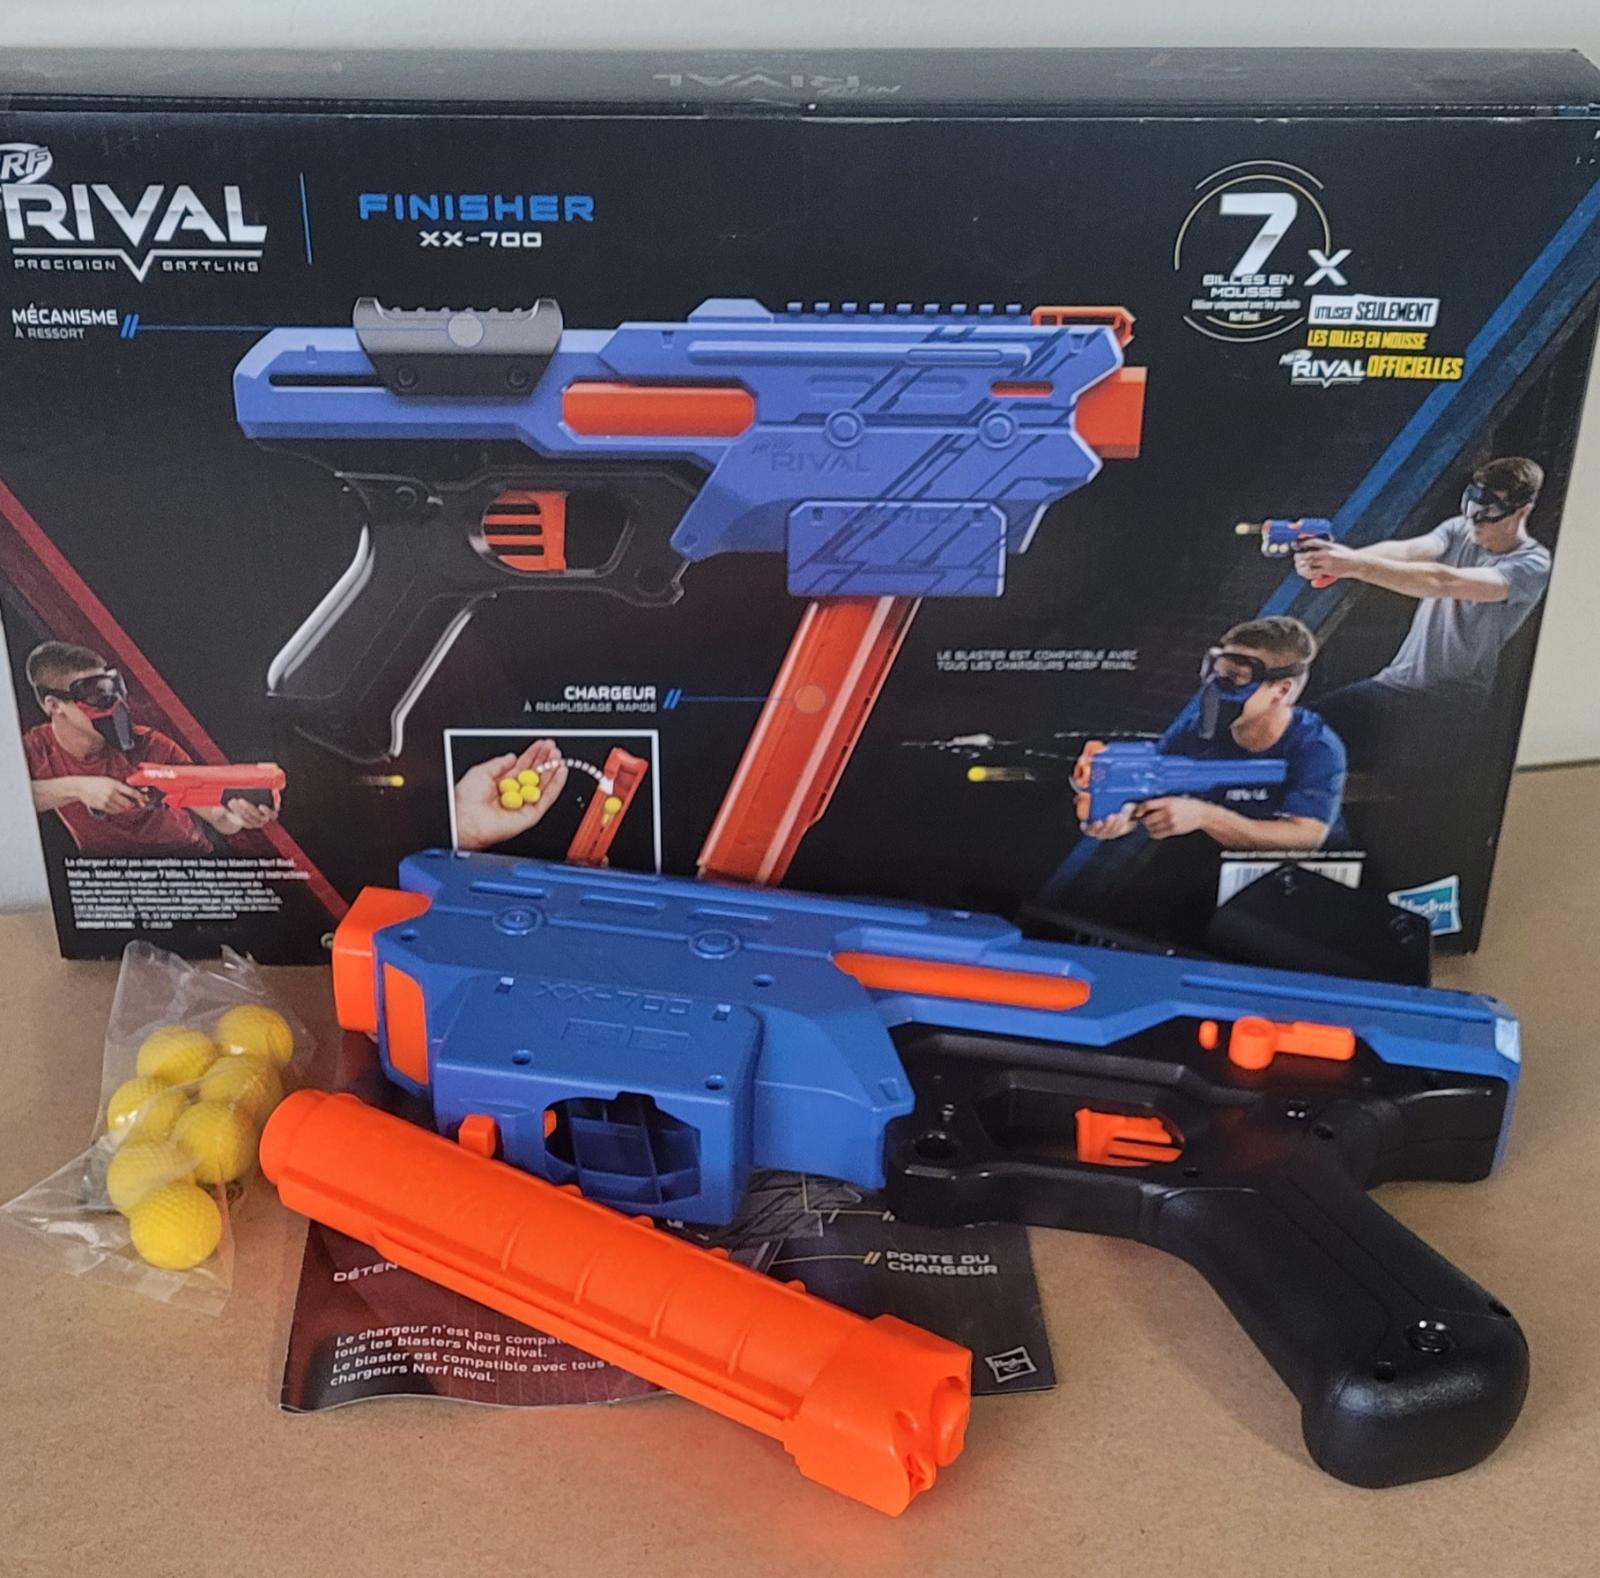 Nerf rival - blaster finisher xx-700, chargeur a remplissage